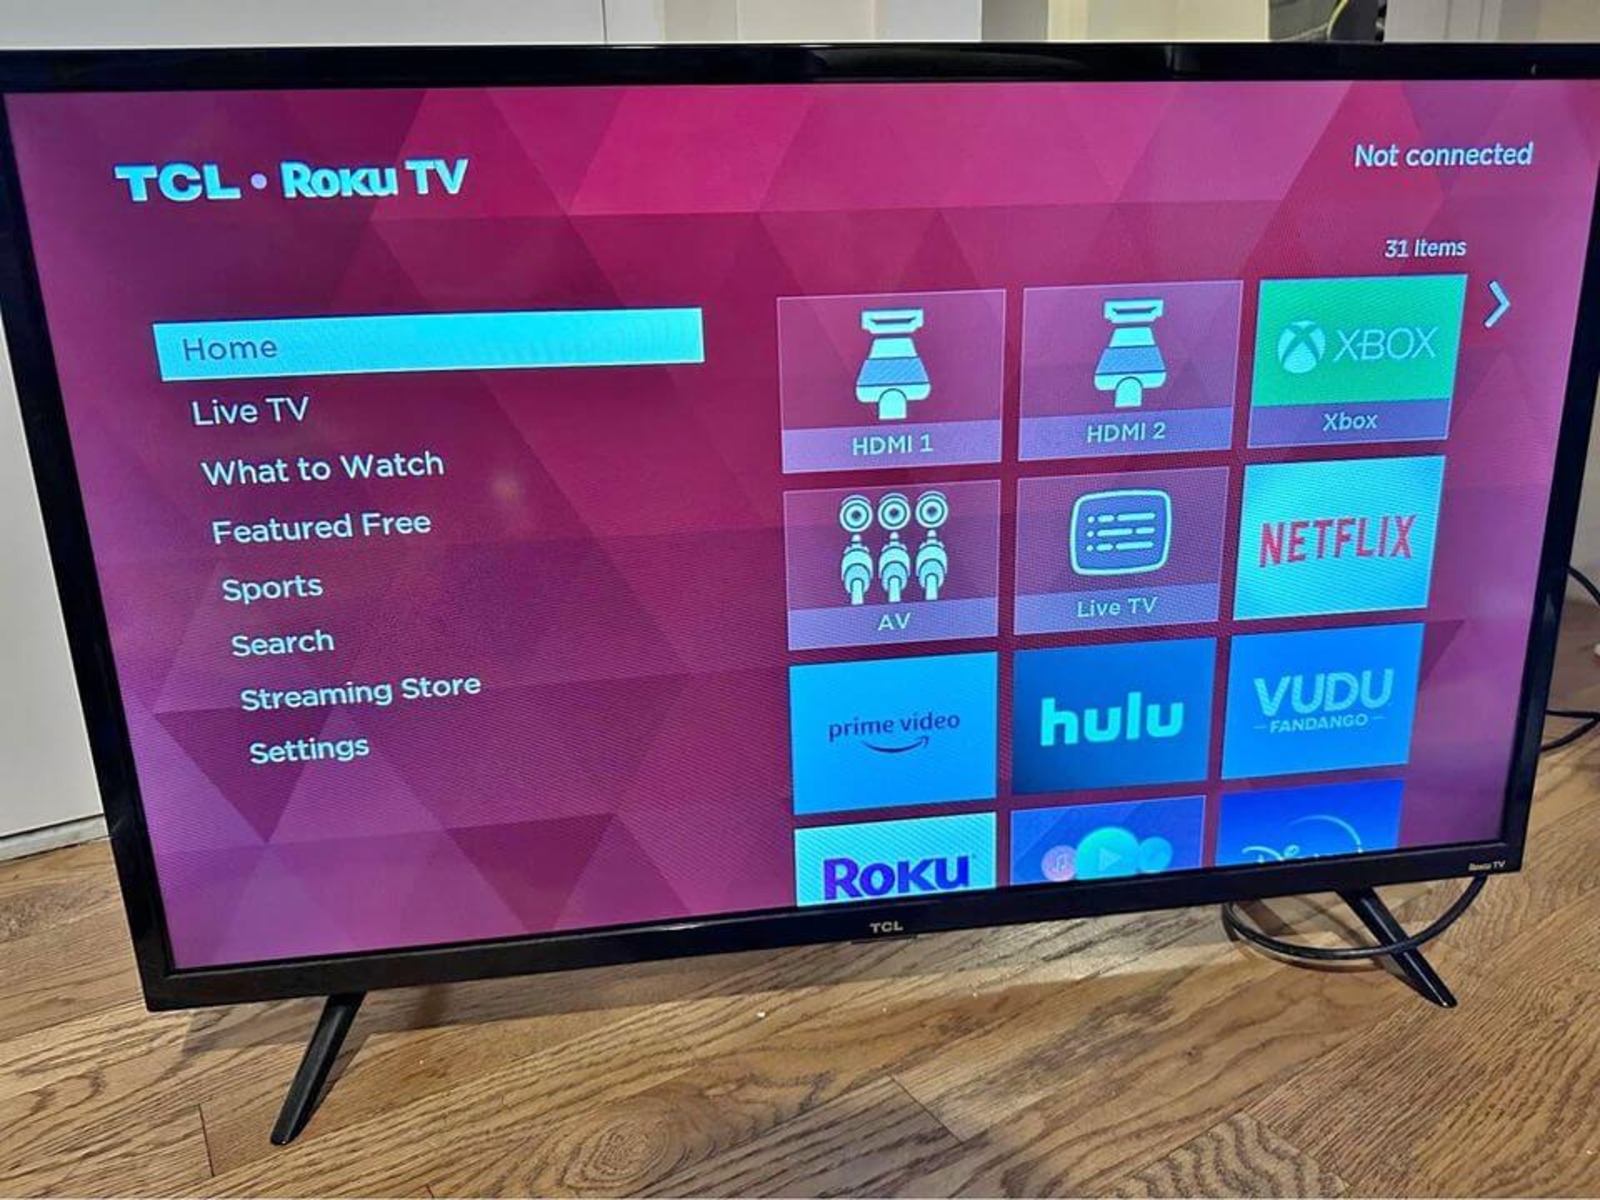 how-to-switch-hdmi-on-tcl-roku-tv